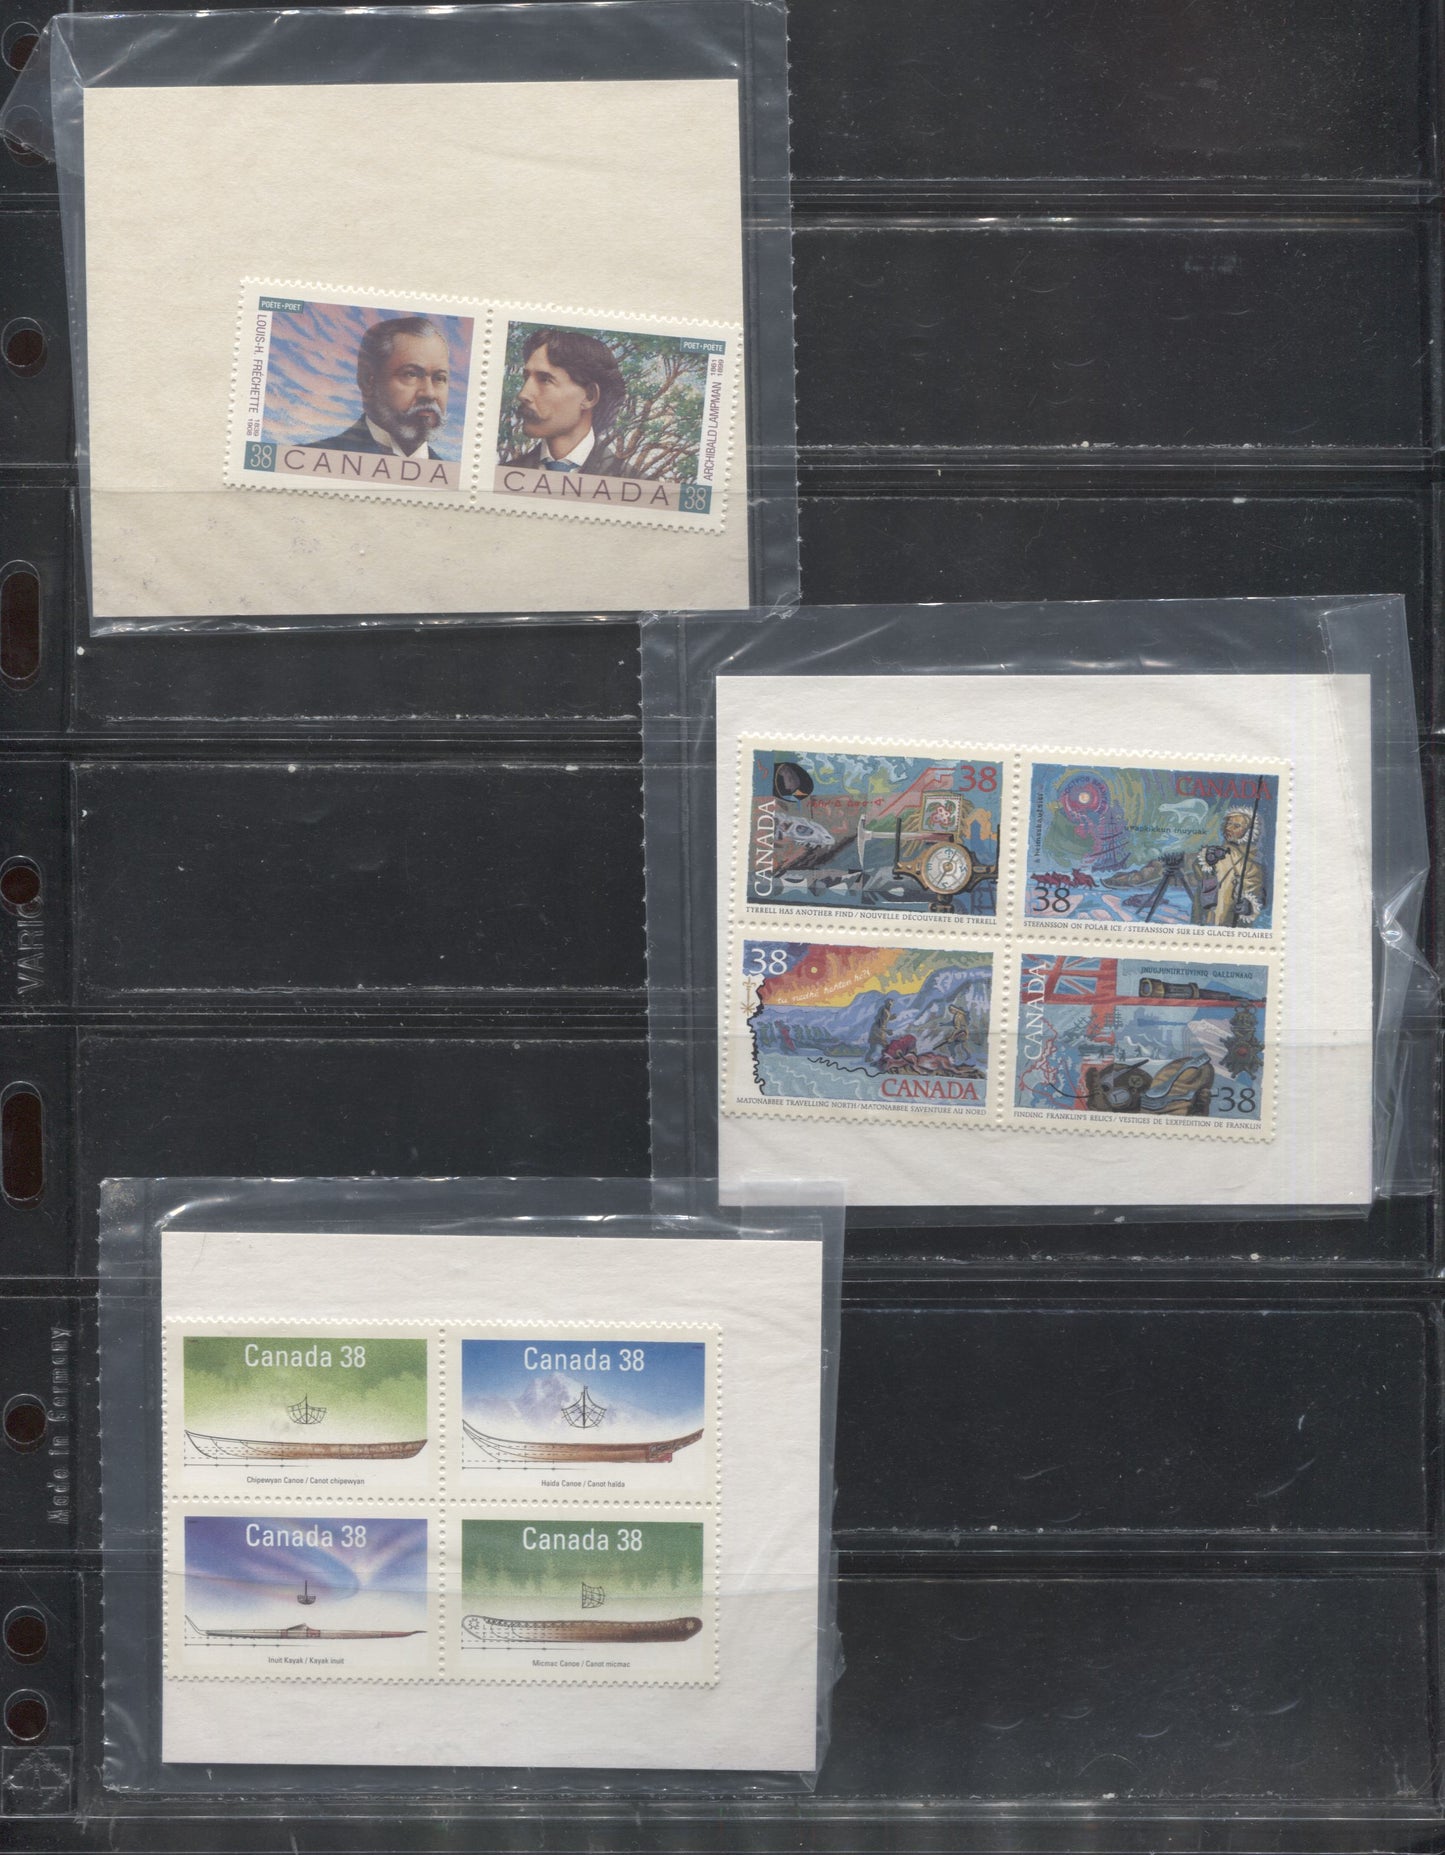 Lot 60 Canada #1229/1250 38c & 50c Multicoloured, 1989 Native Boats - Regiments, 6 Canada Post Sealed Packs Containing VFNH Pairs and Blocks With Type 2b & 5a Style Philatelic Service Card Inserts